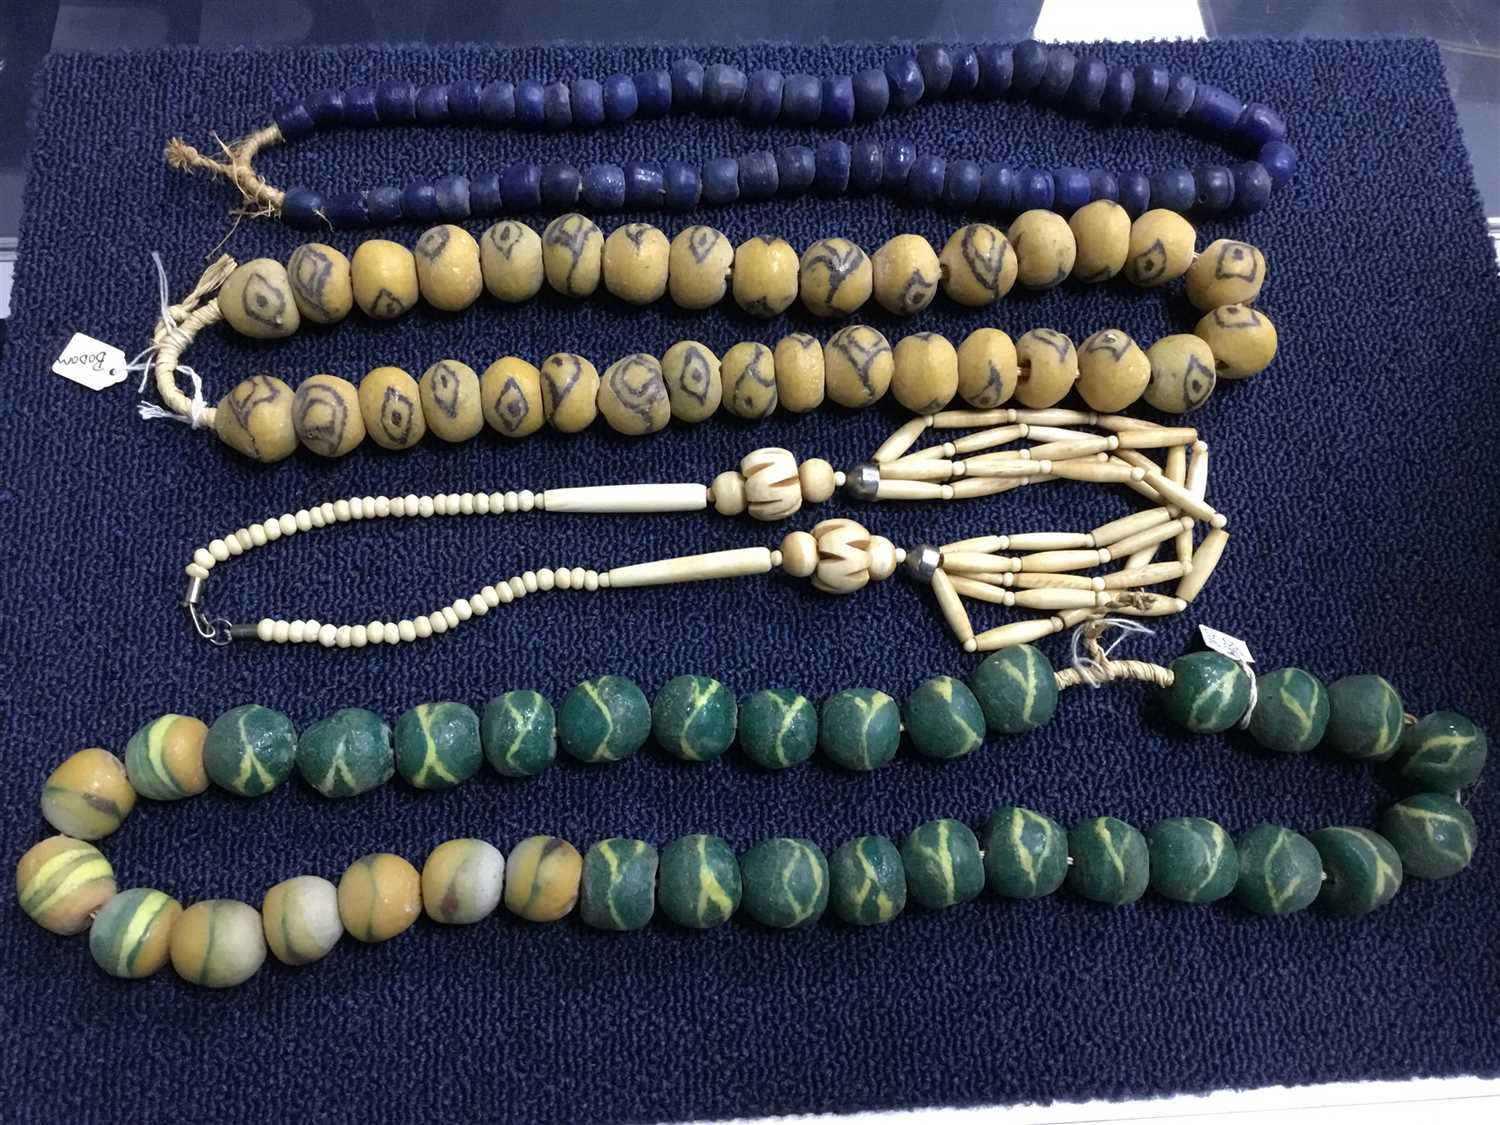 Lot 17 - A COLLECTION OF NIGERIAN GLASS BEAD NECKLACES AND OTHER NECKLACES